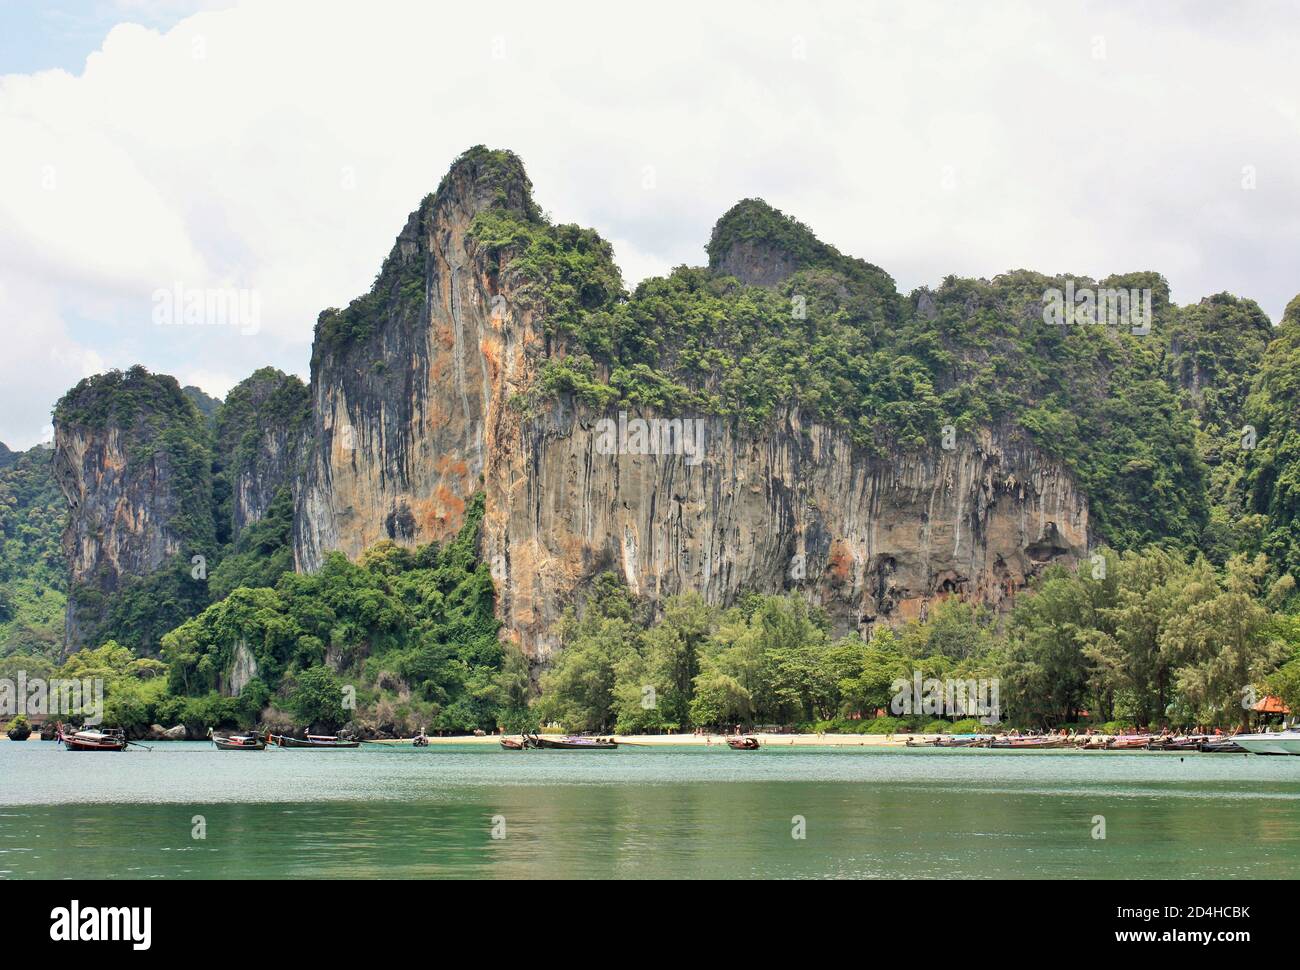 Limestone cliffs and spectacular scenery on Railay Beach